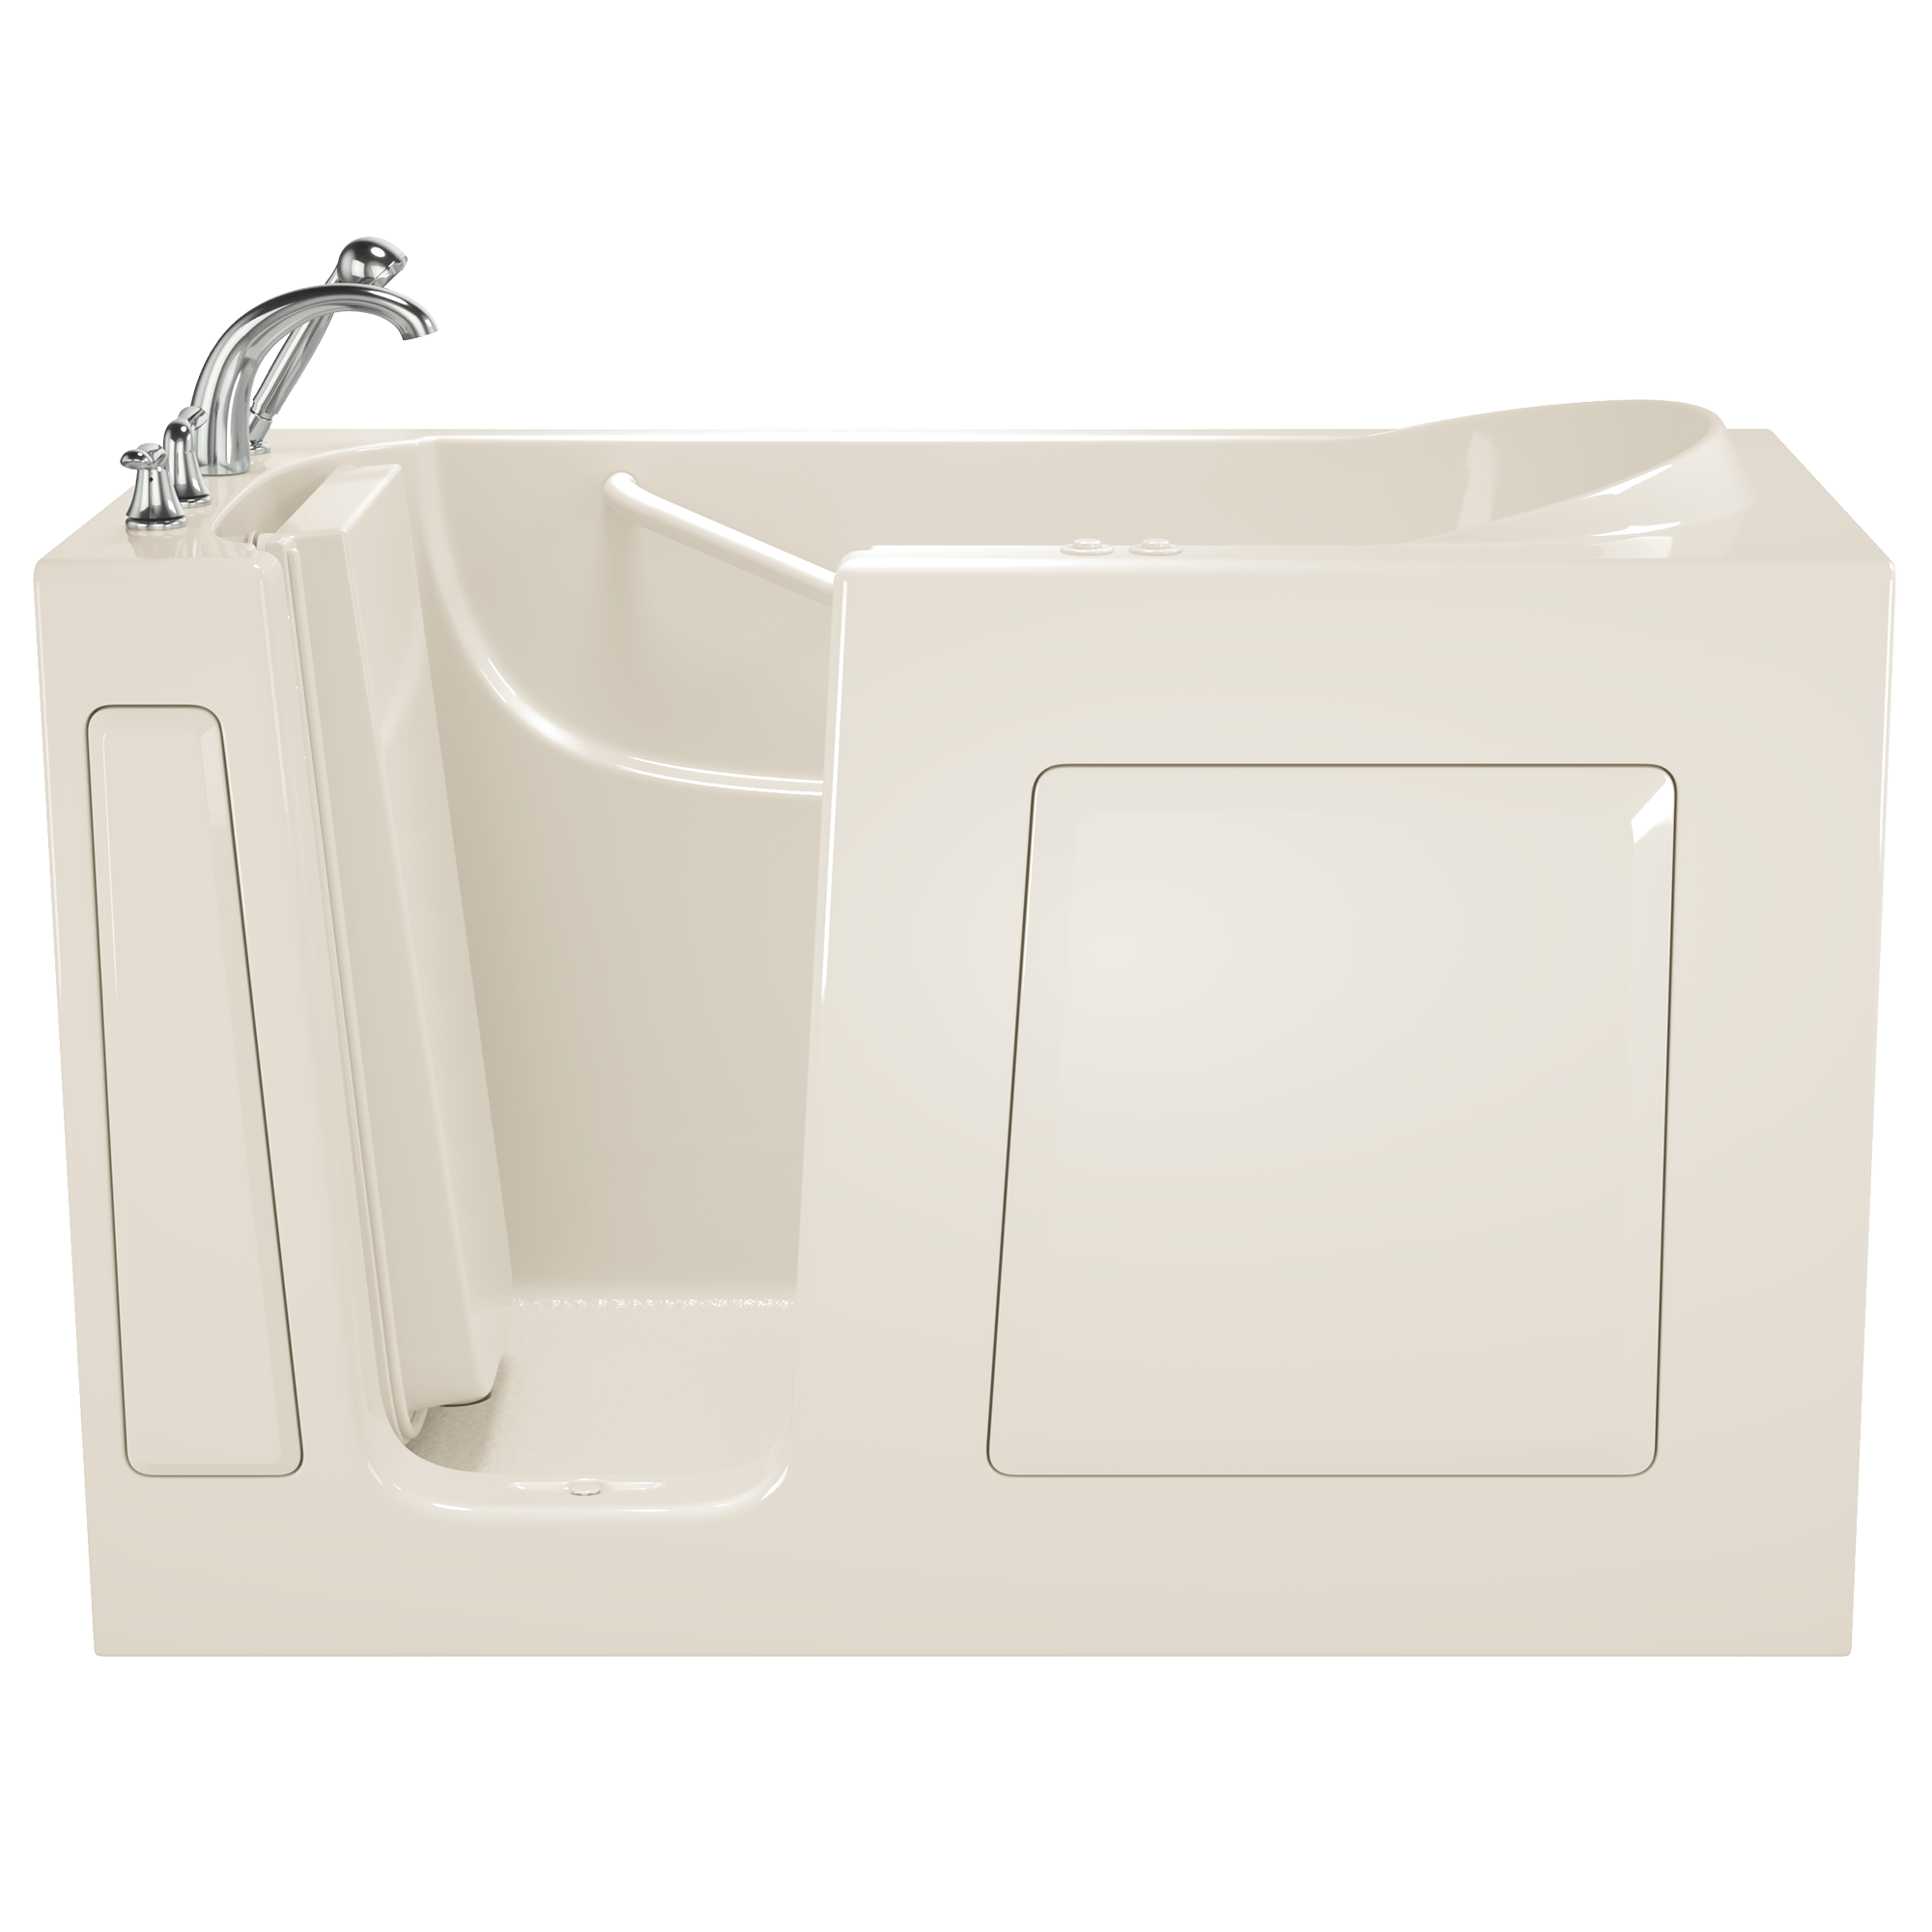 Gelcoat Entry Series 60 x 30-Inch Walk-In Tub With Combination Air Spa and Whirlpool Systems – Left-Hand Drain With Faucet